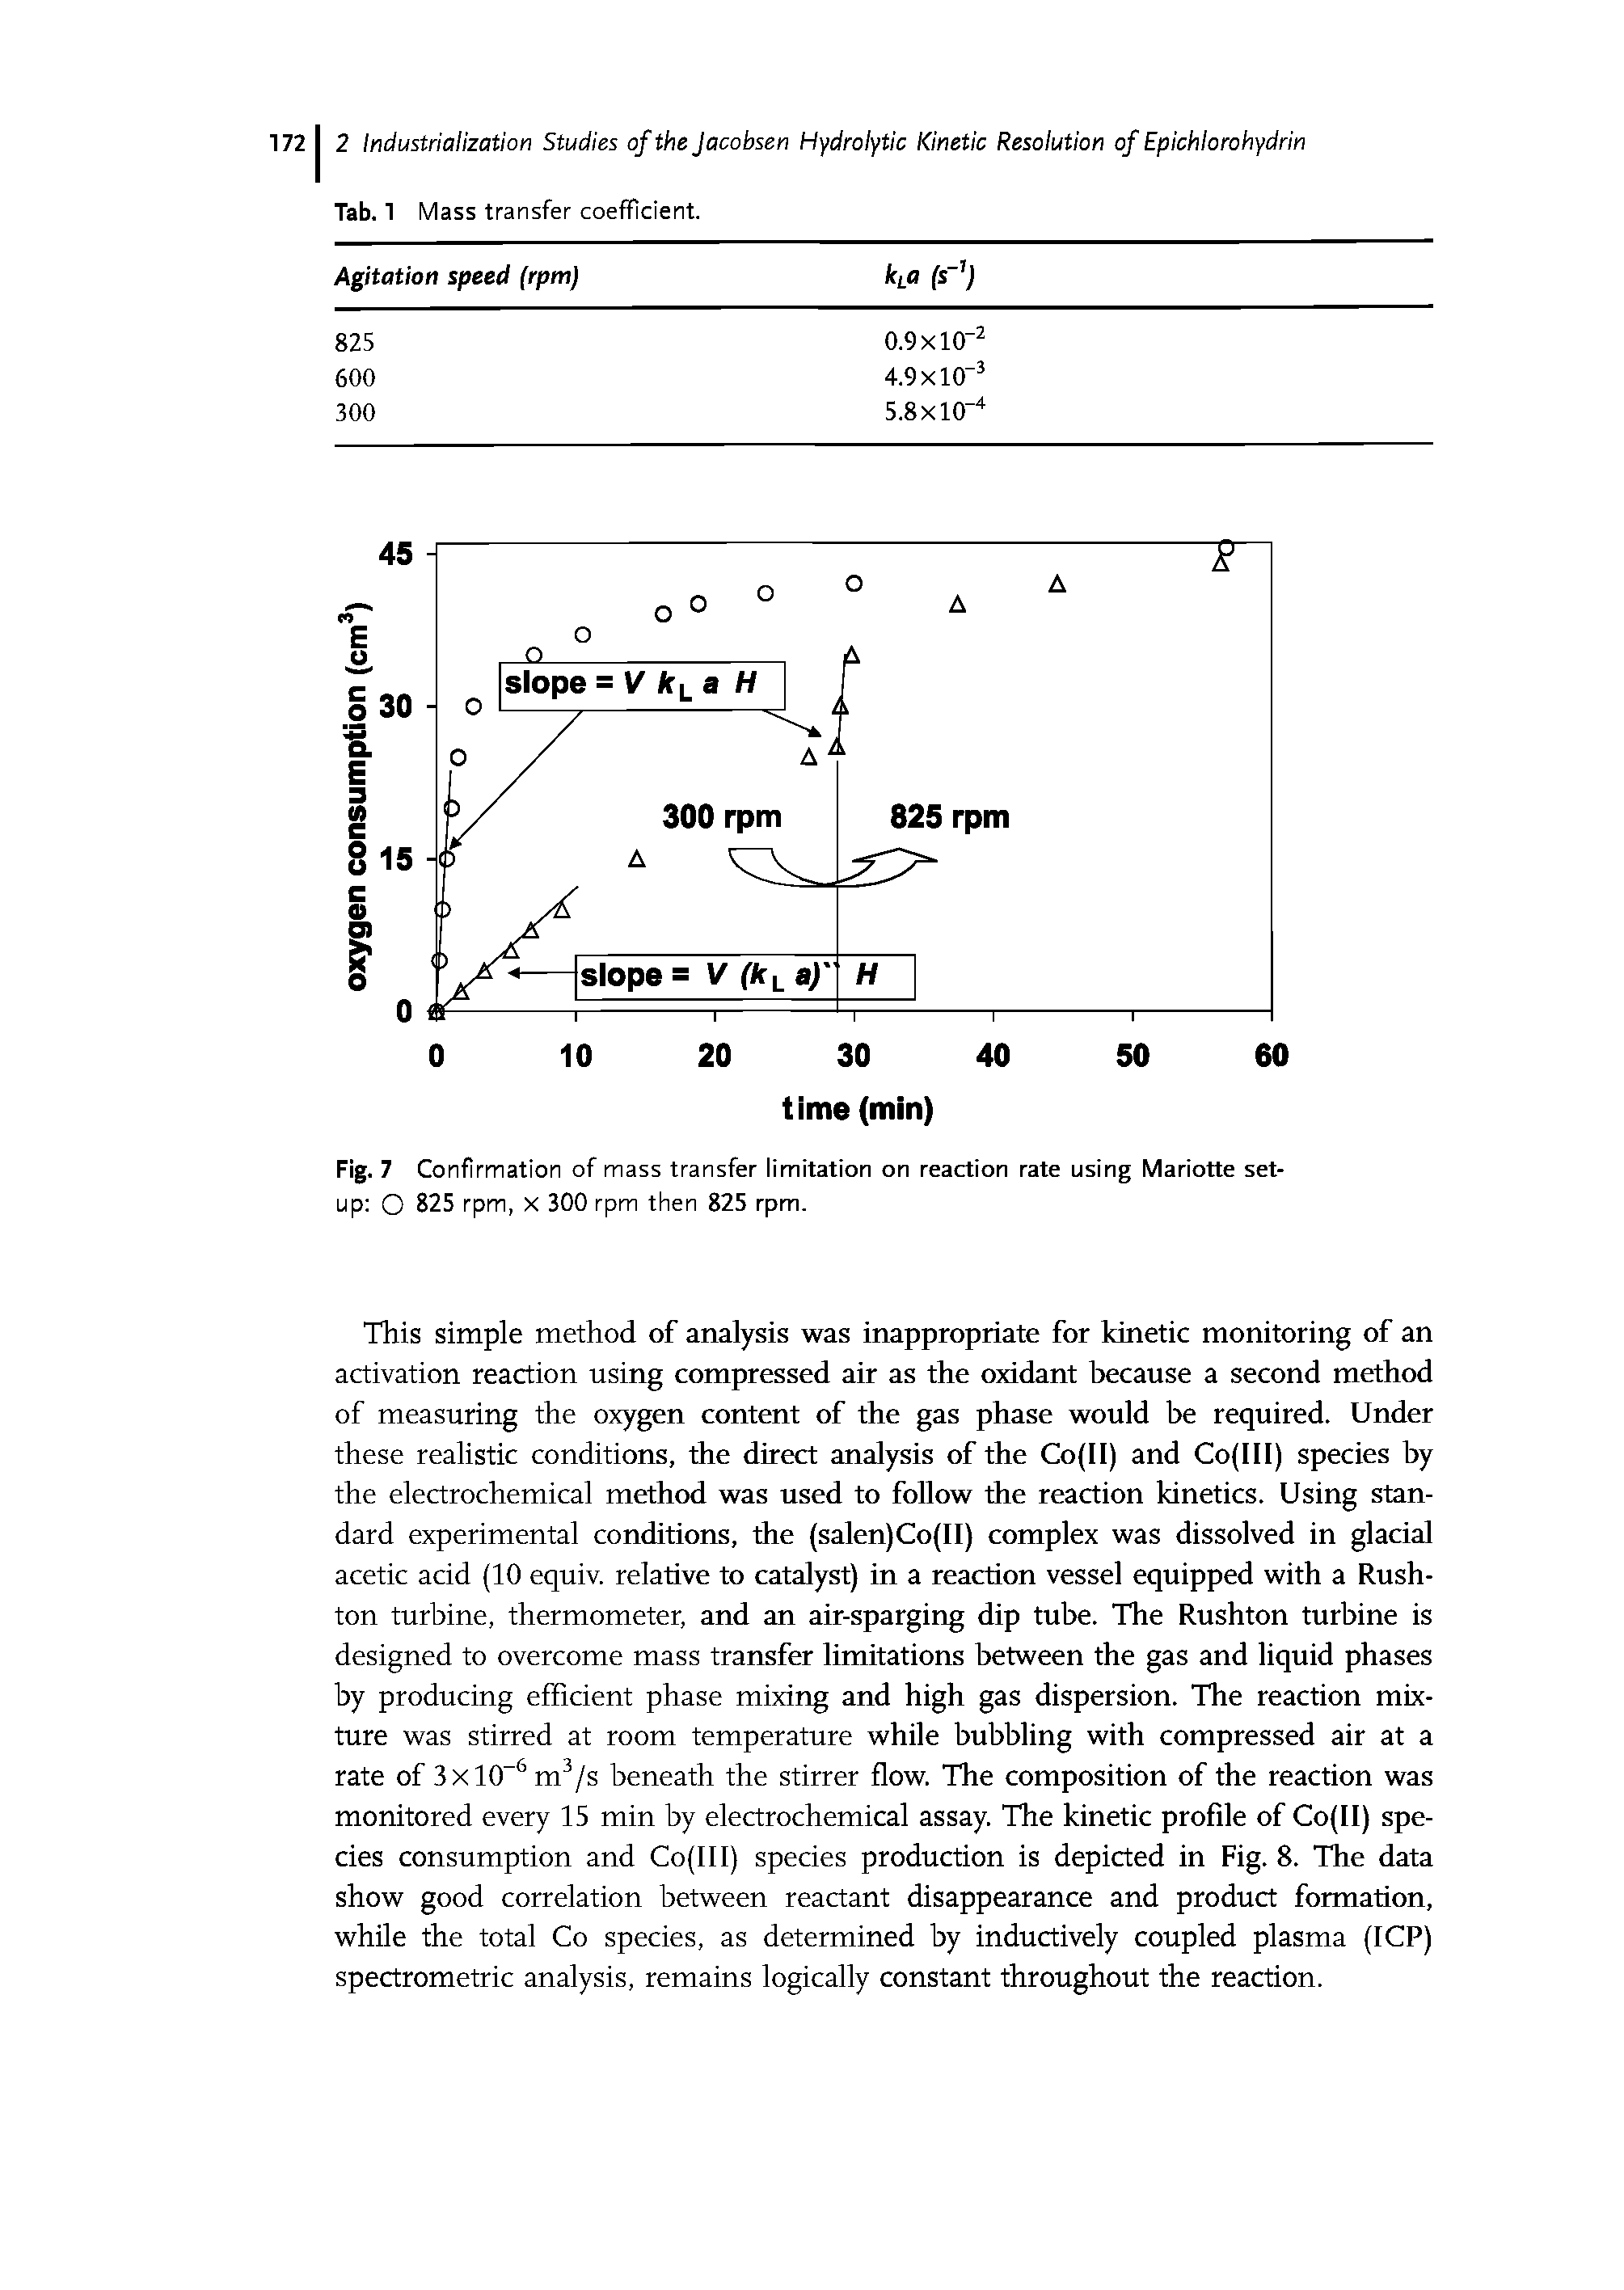 Fig. 7 Confirmation of mass transfer limitation on reaction rate using Mariotte setup O 825 rpm, X 300 rpm then 825 rpm.